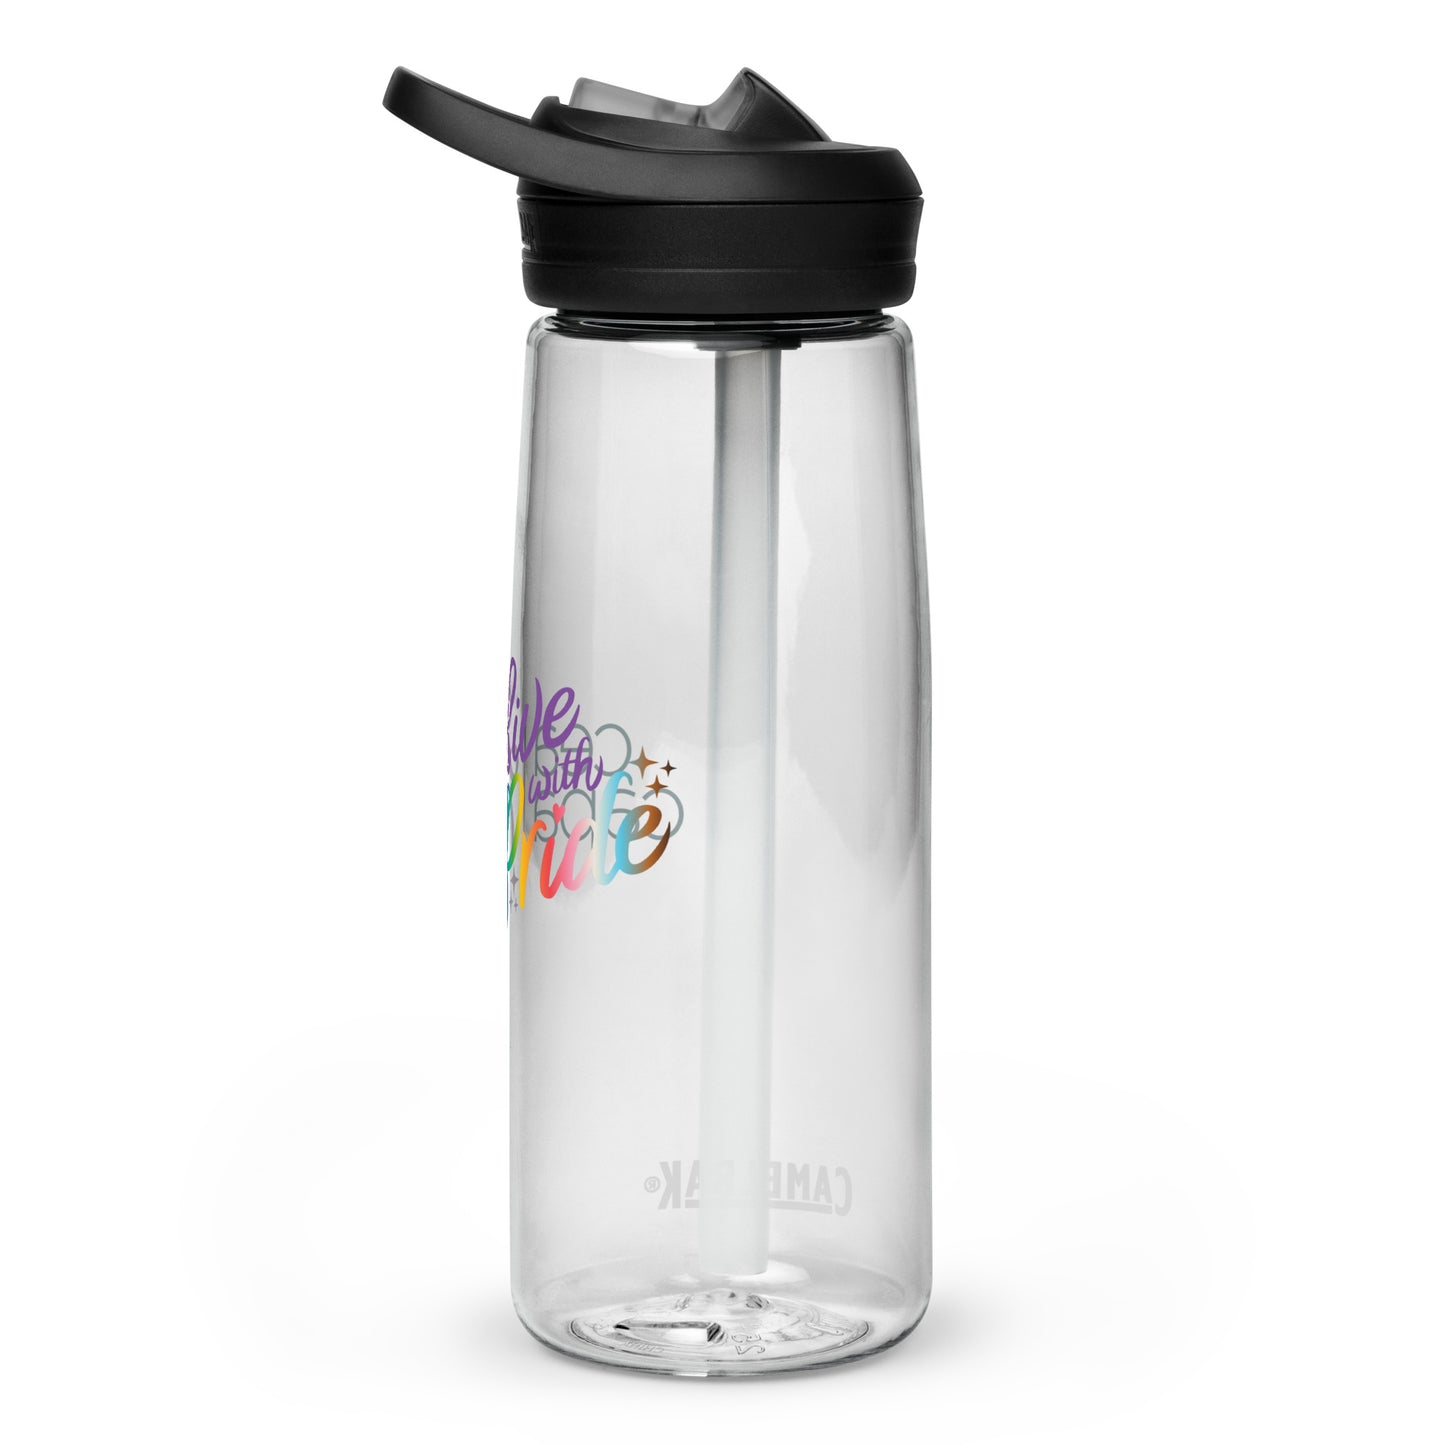 Live with Pride Water Bottle